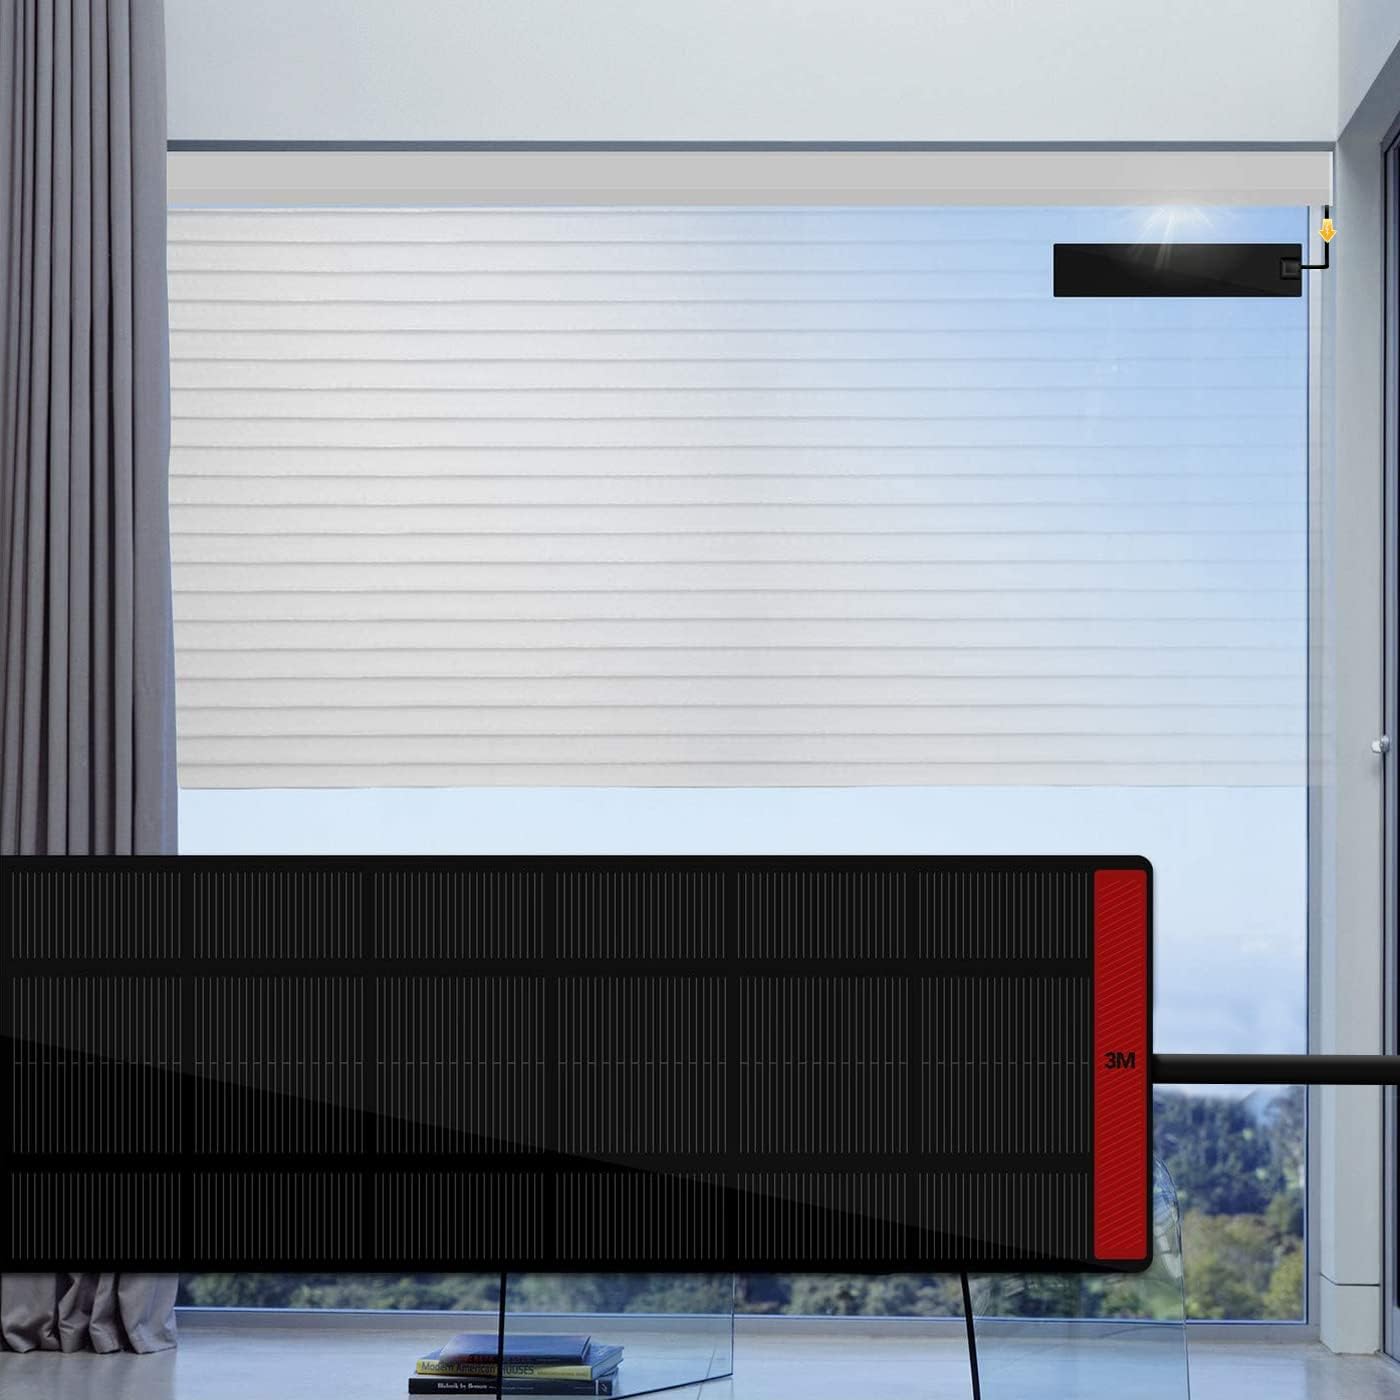 Yoolax Motorized Blind Shade for Window with Remote Control